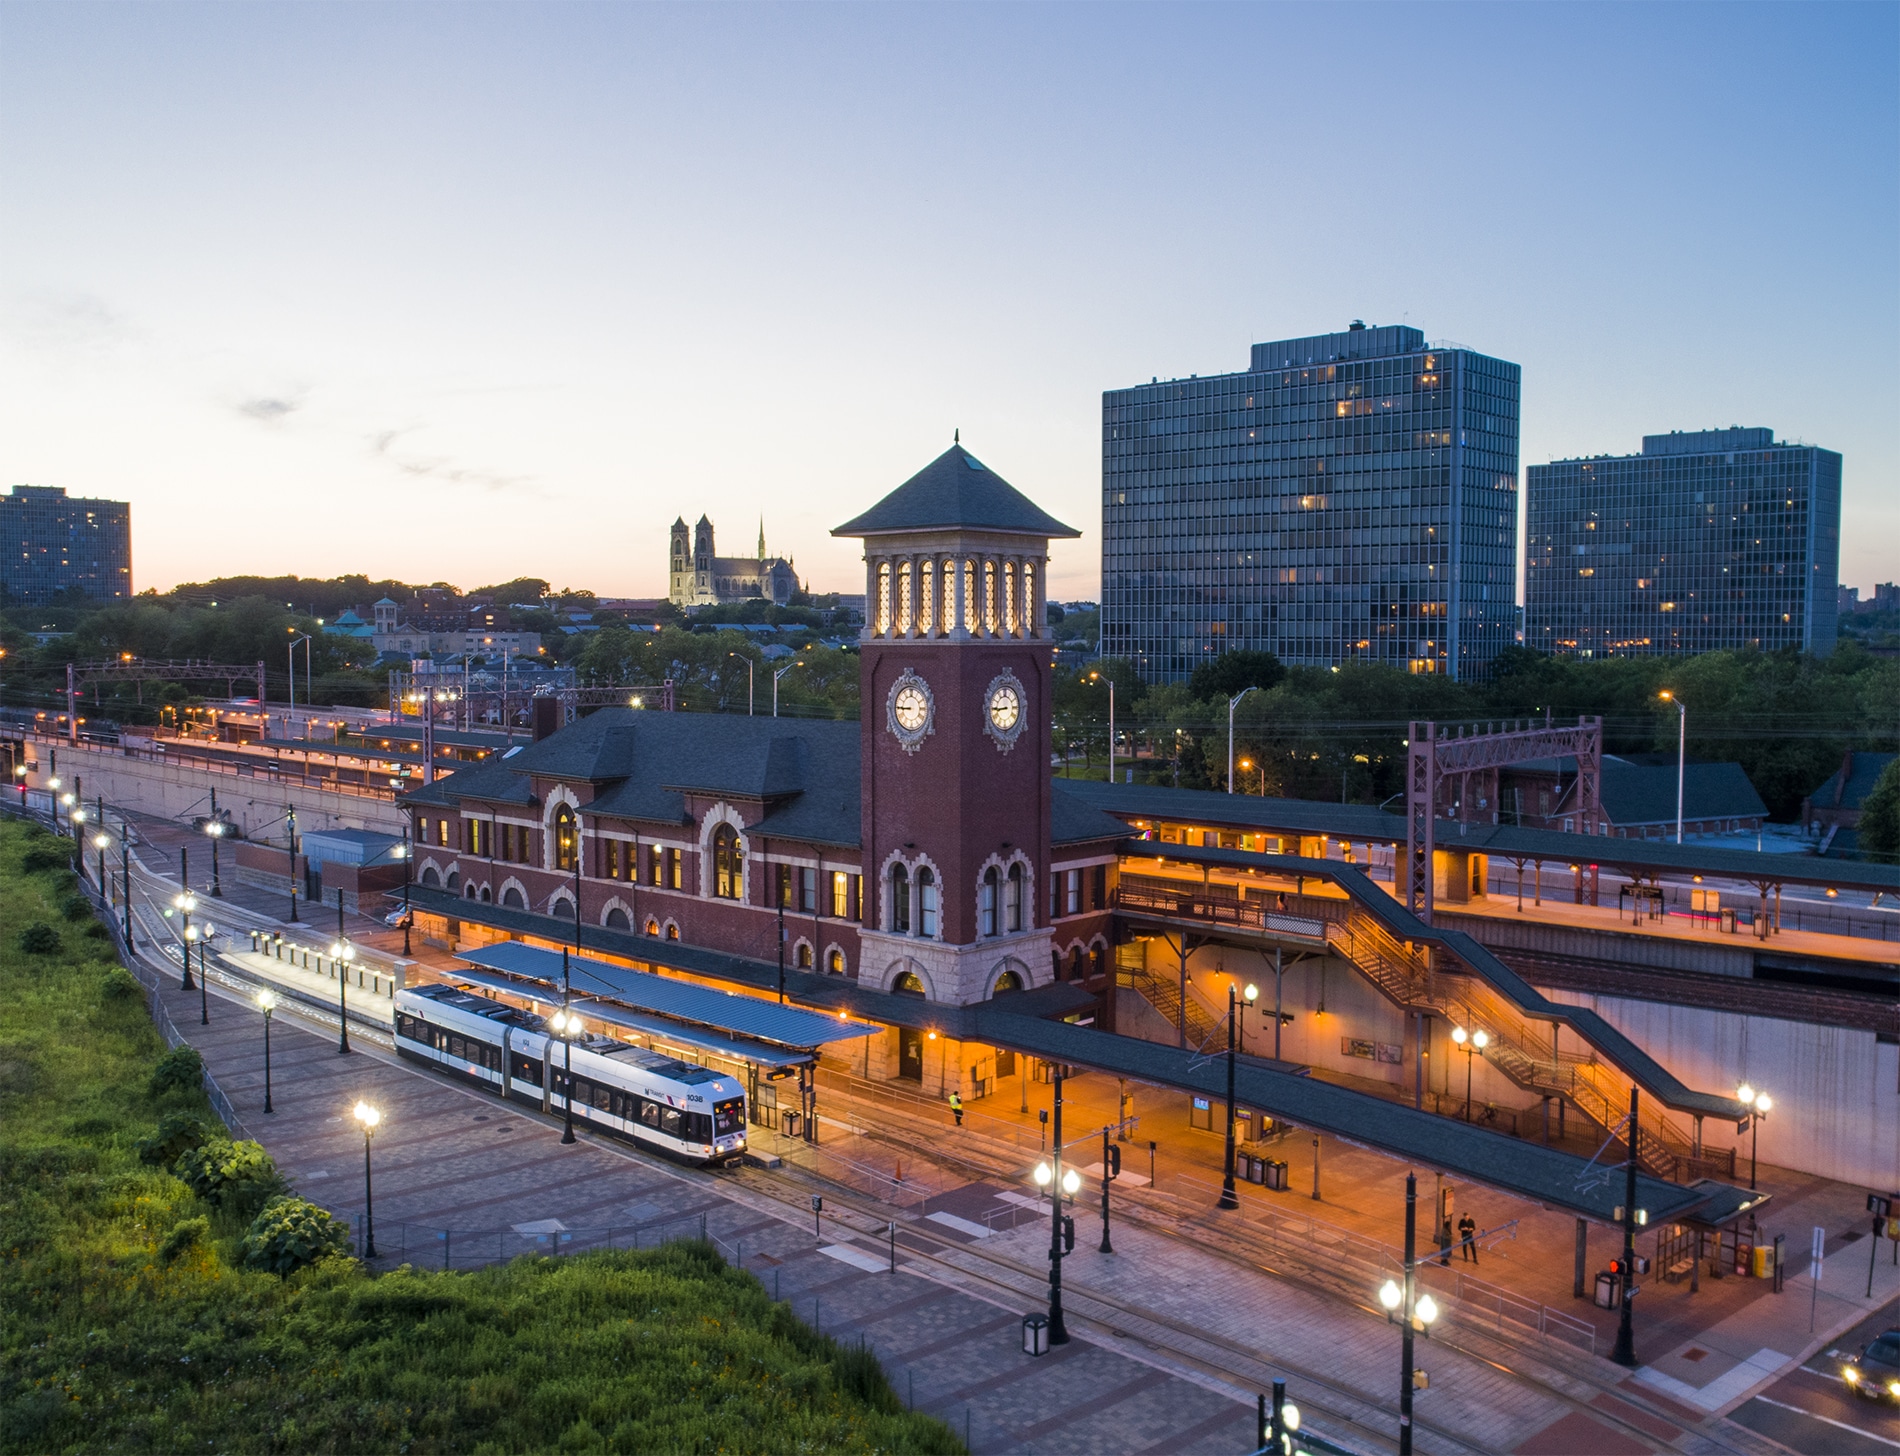 Drone Photograph taken at sunset of Broad St Light Rail Station in Newark New Jersey